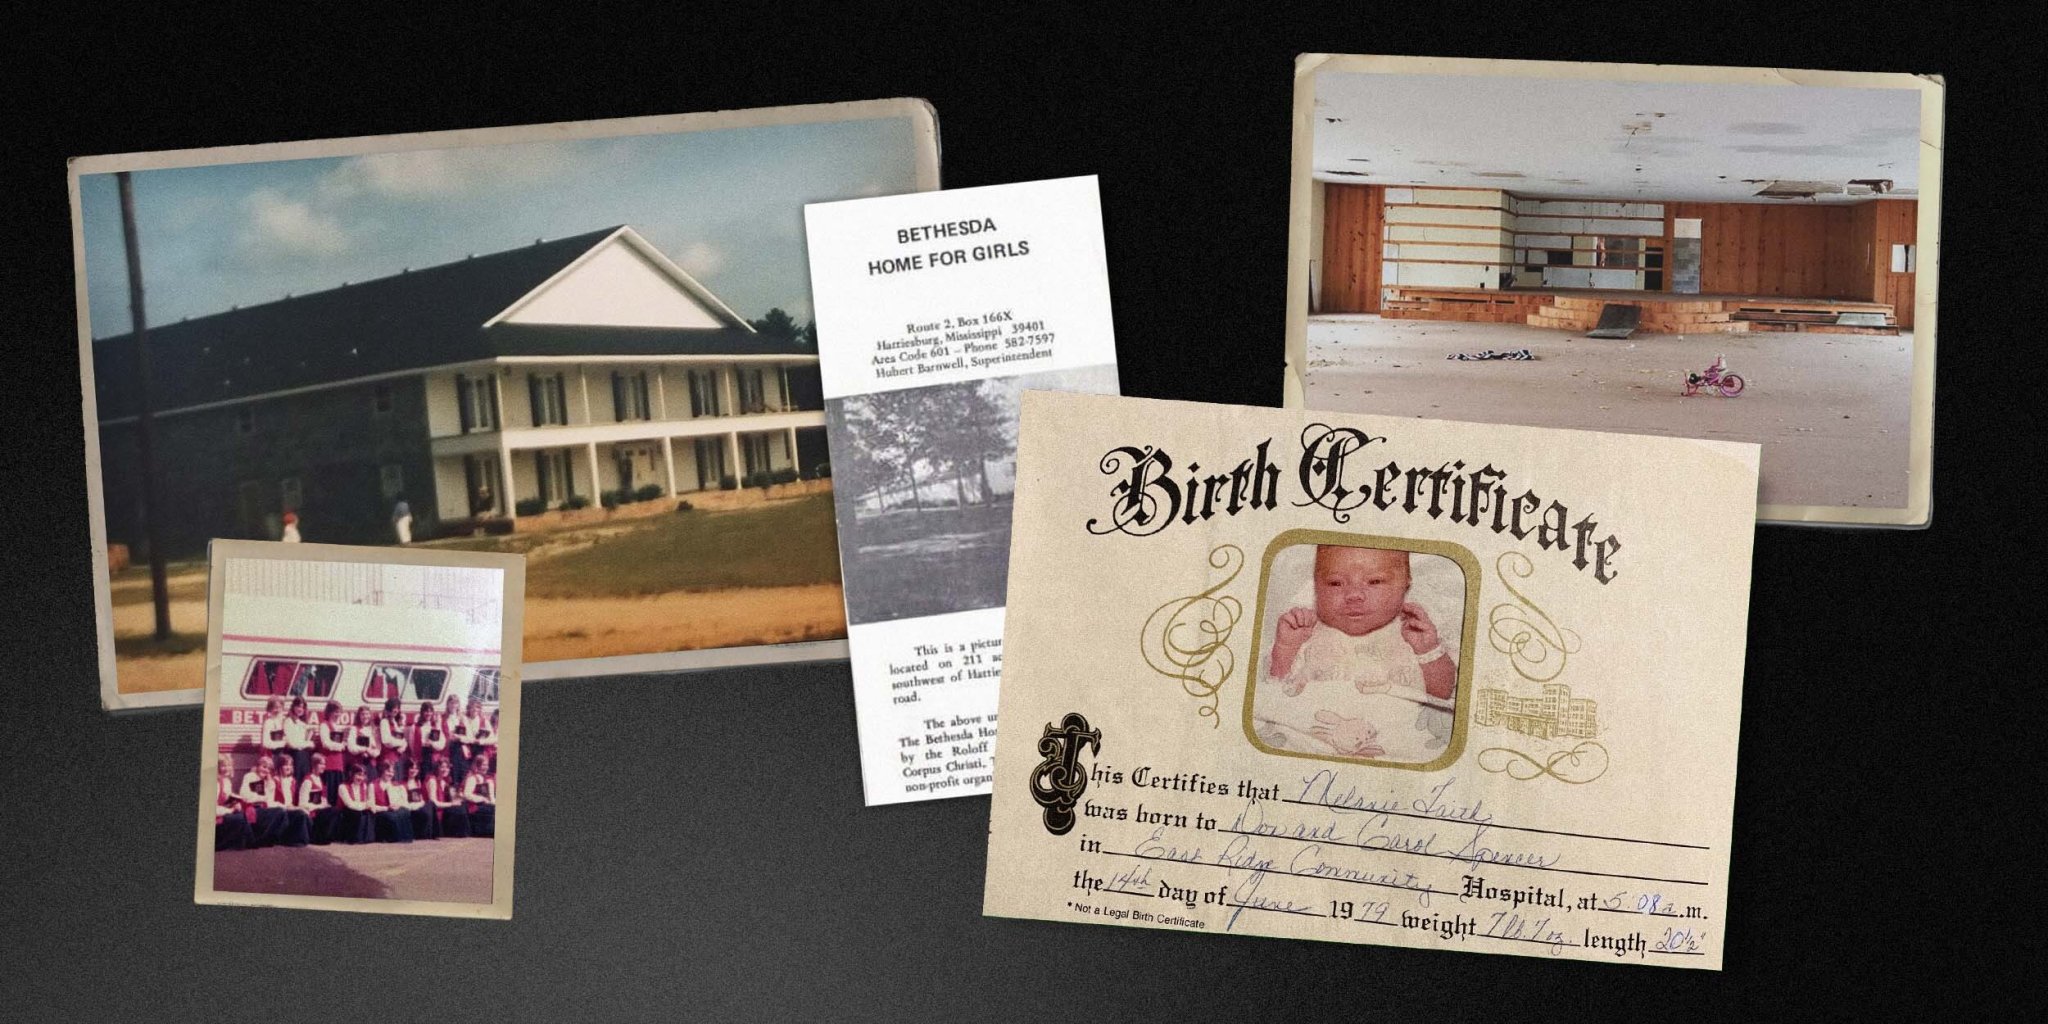 SPECIAL REPORT: The Bethesda Home for Girls took teens' babies. Women are still searching decades later.